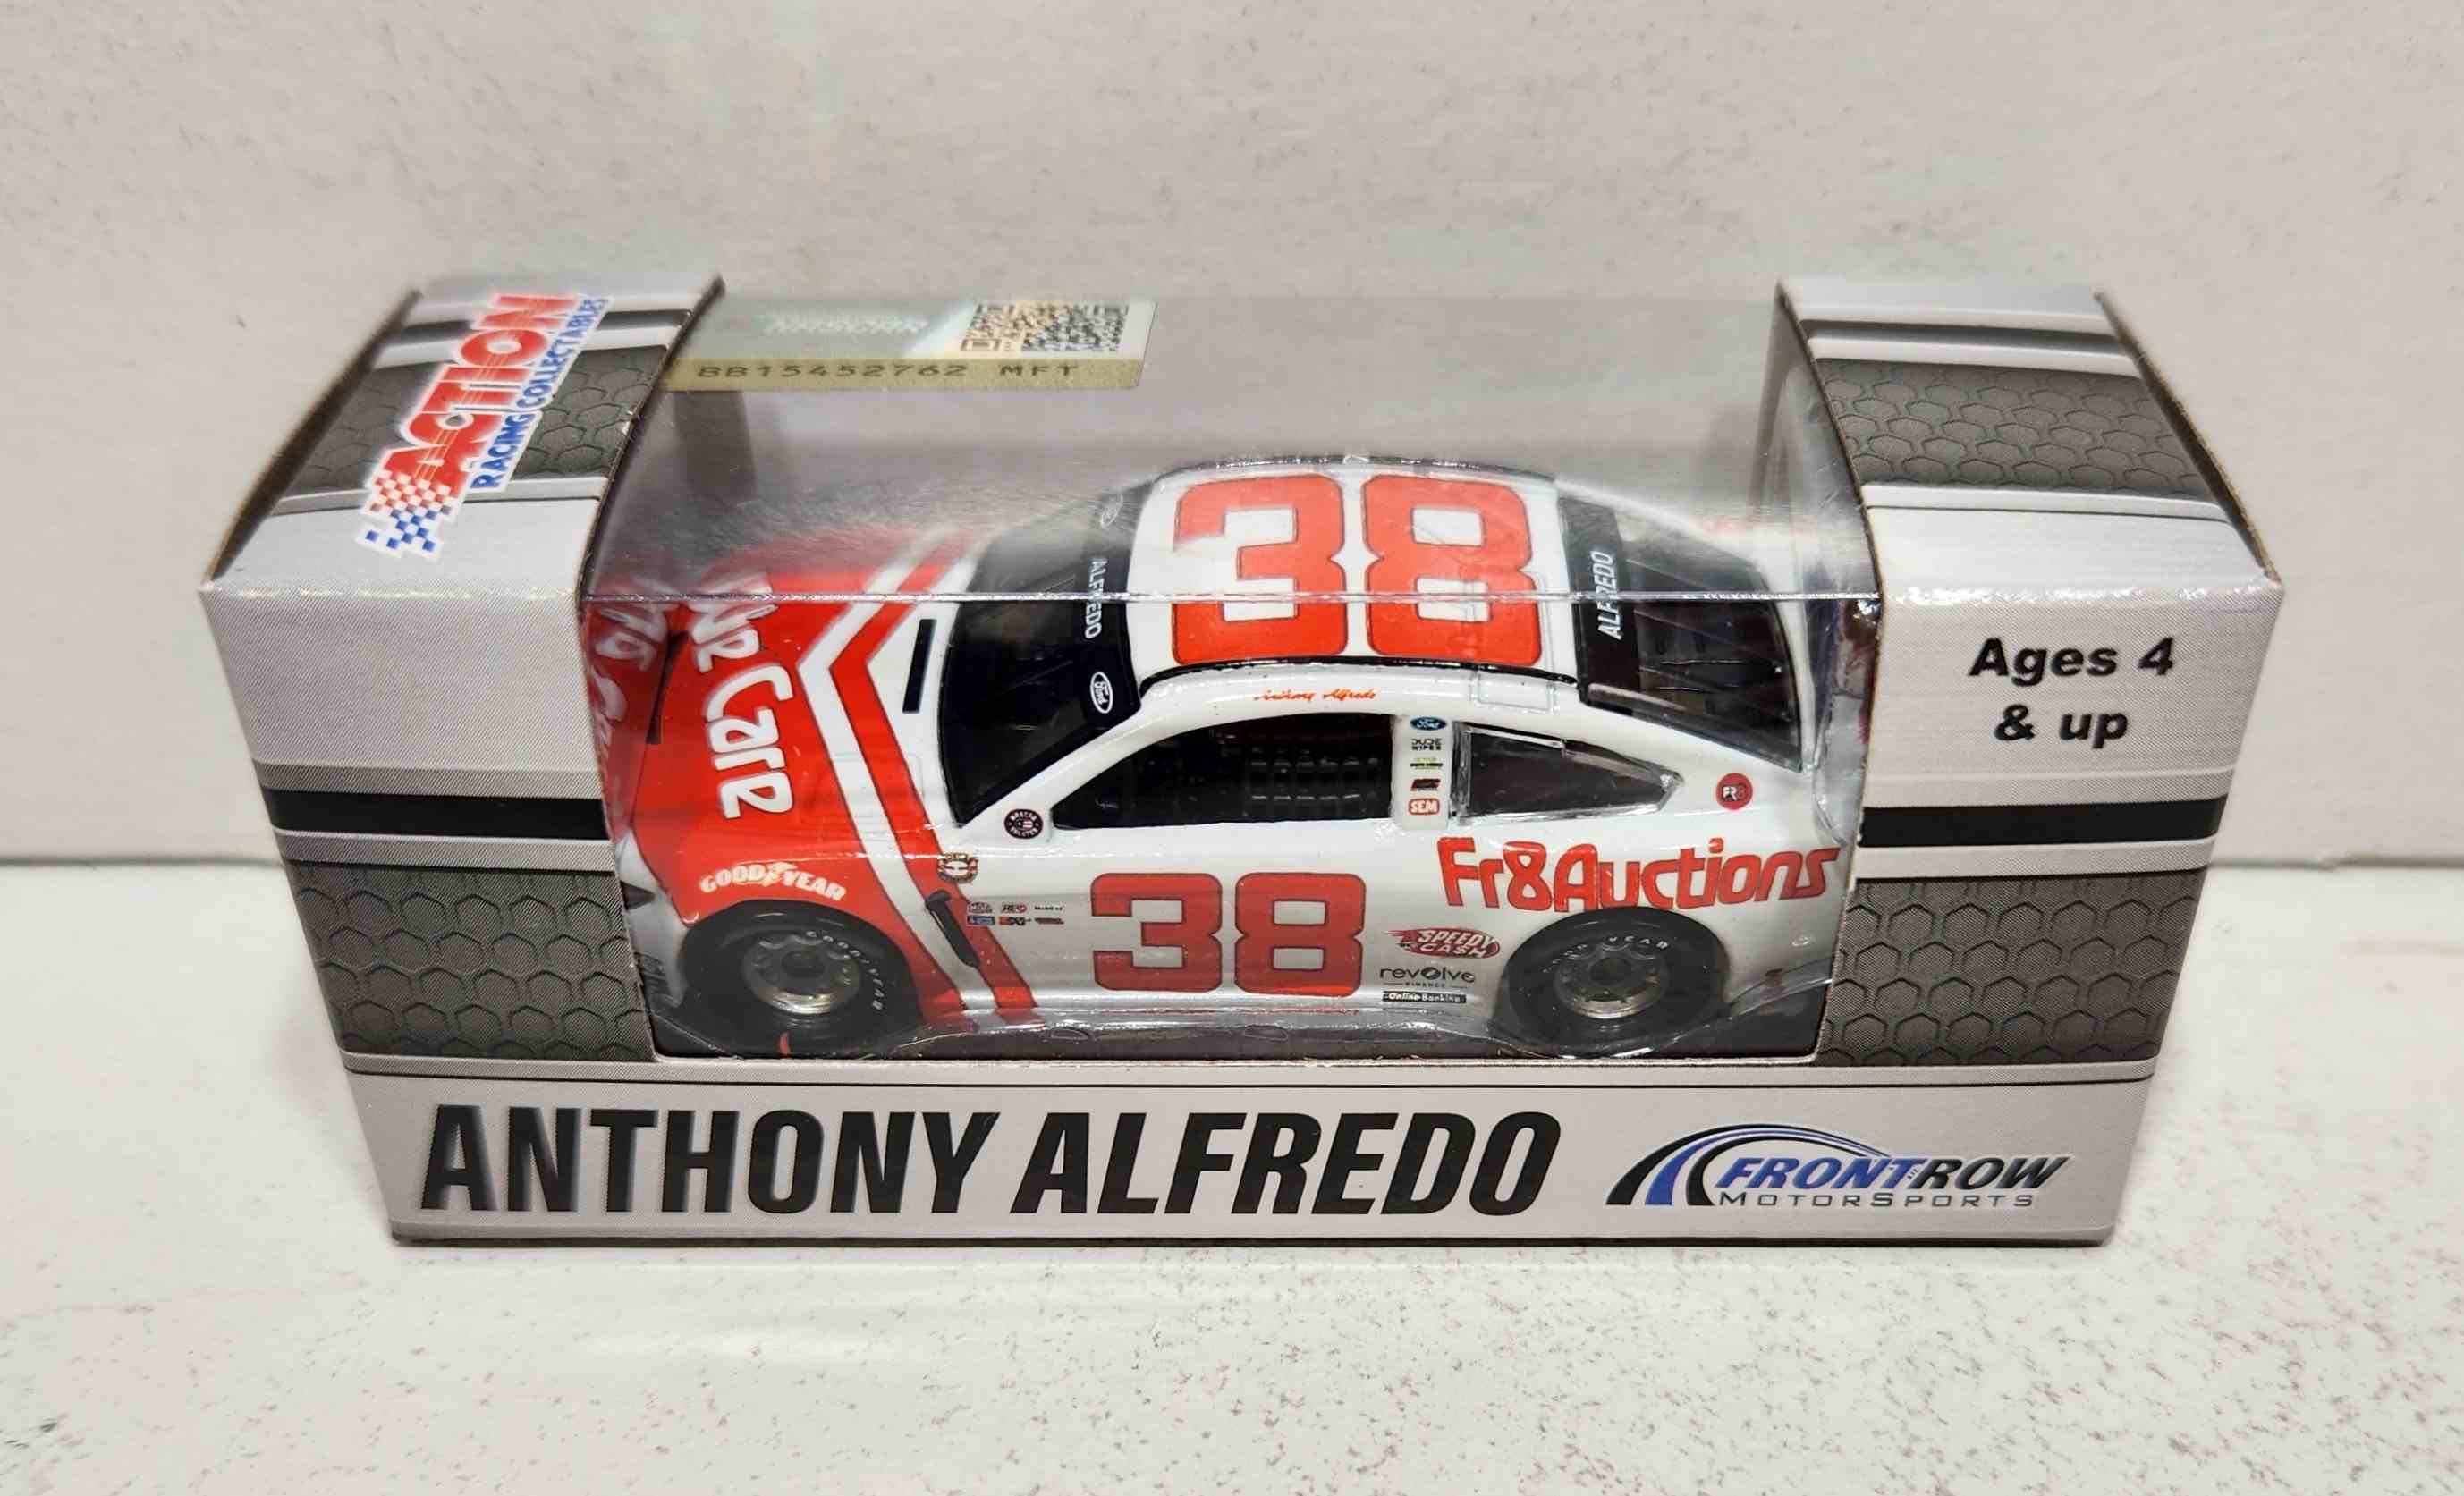 2021 Anthony Alfredo 1/64th FR 8 Auctions "Darlington Throwback" Mustang